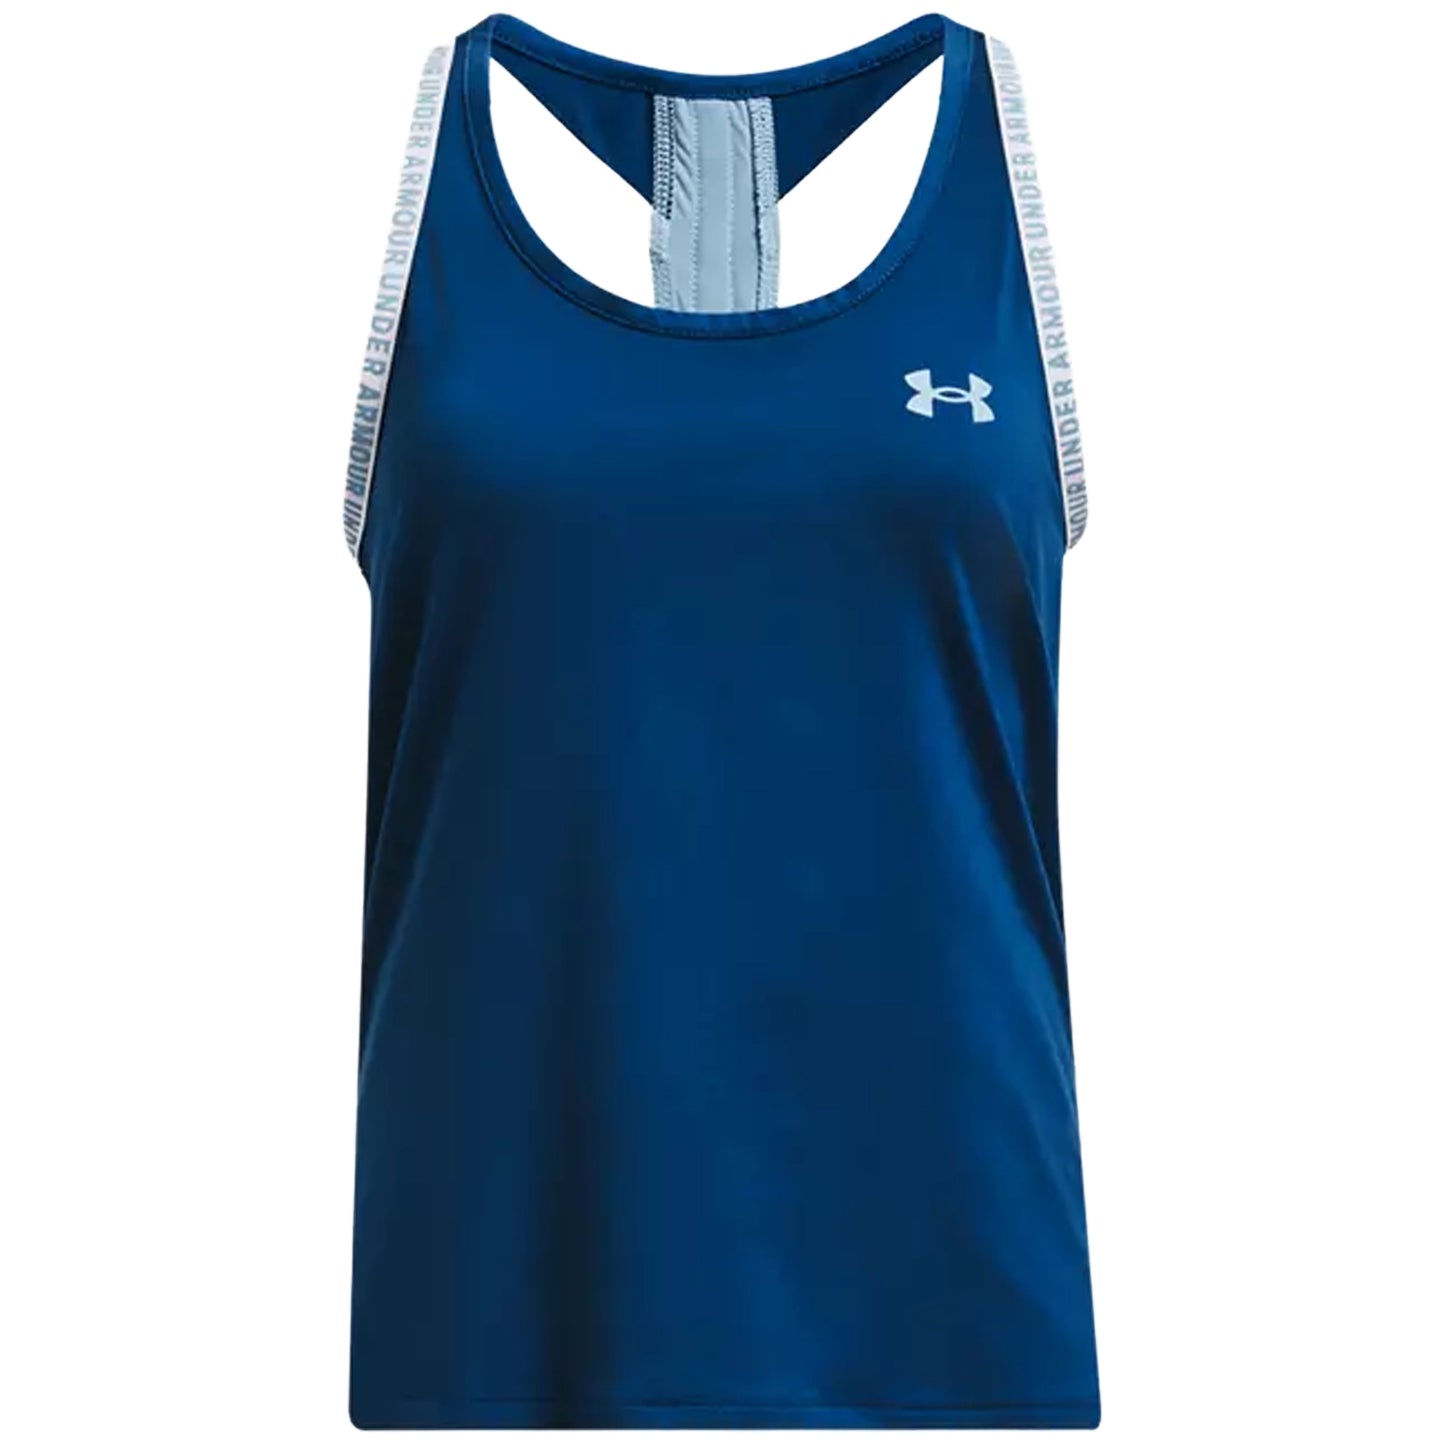 Under Armour Girl's Knockout Tank 1363374-426